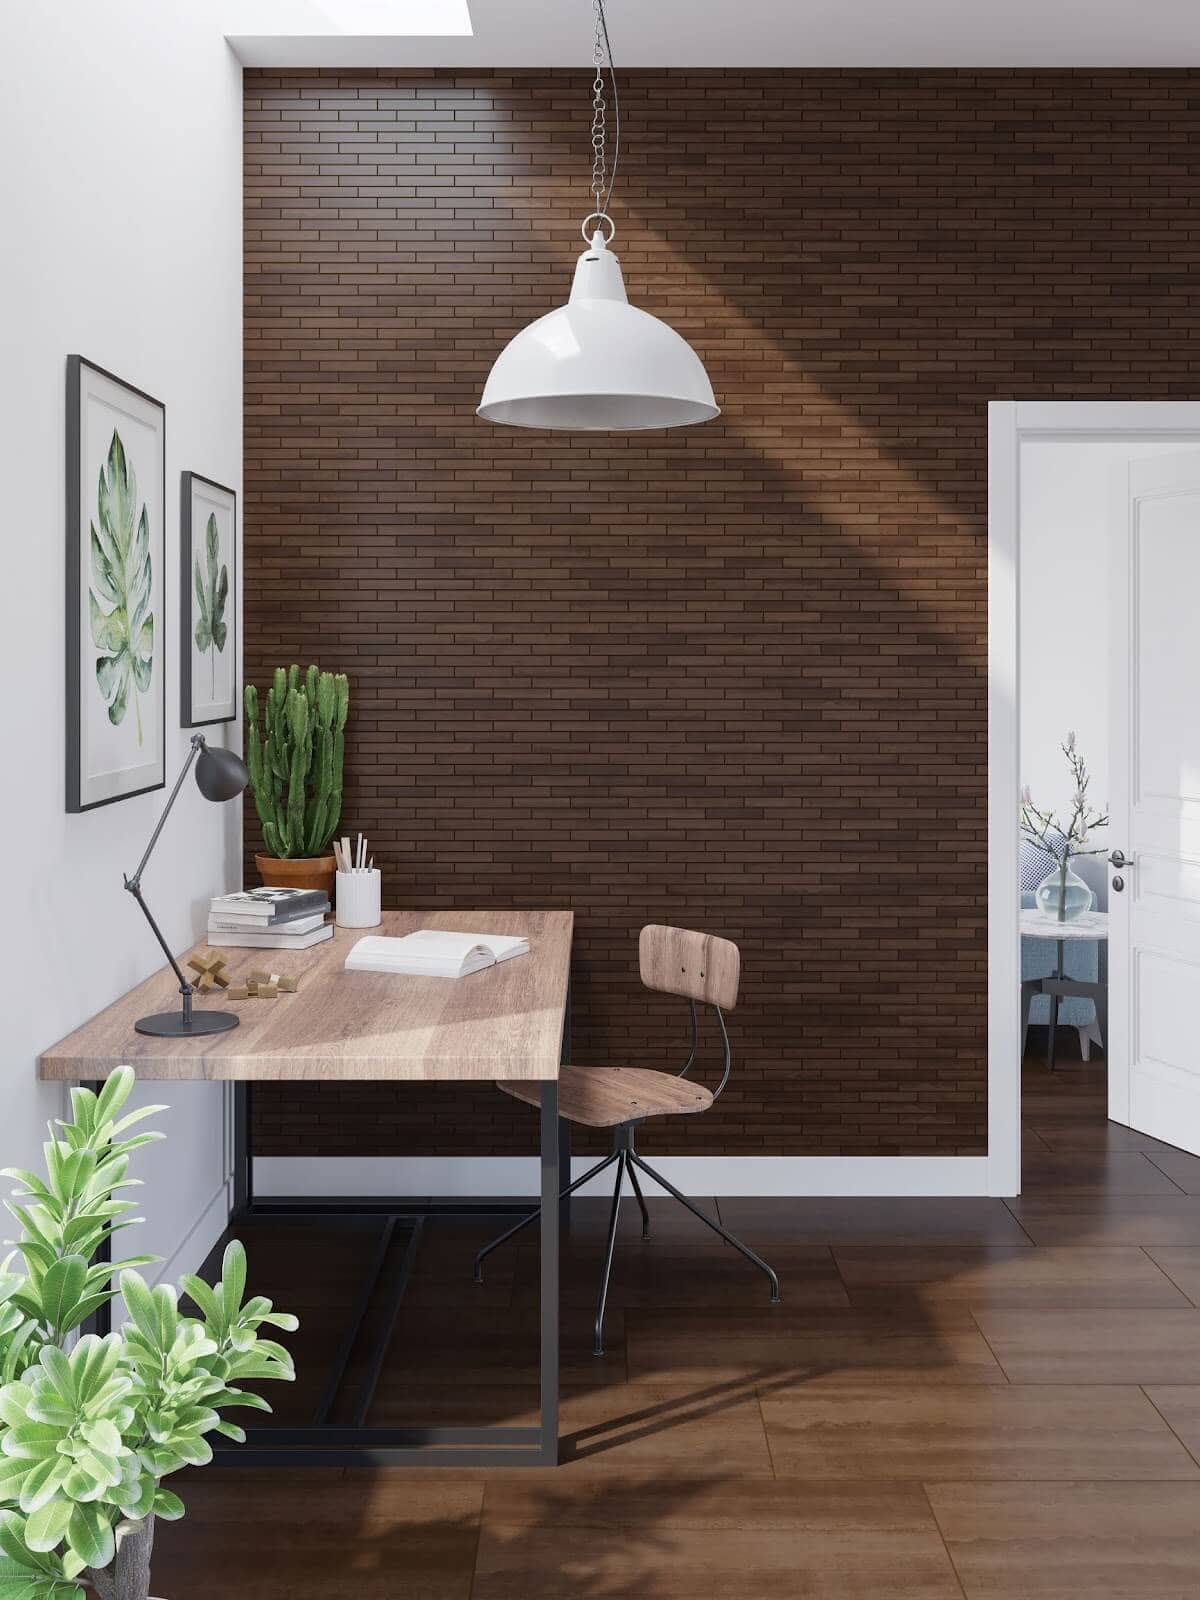 Wood-look tile flooring and wall tile in an office area